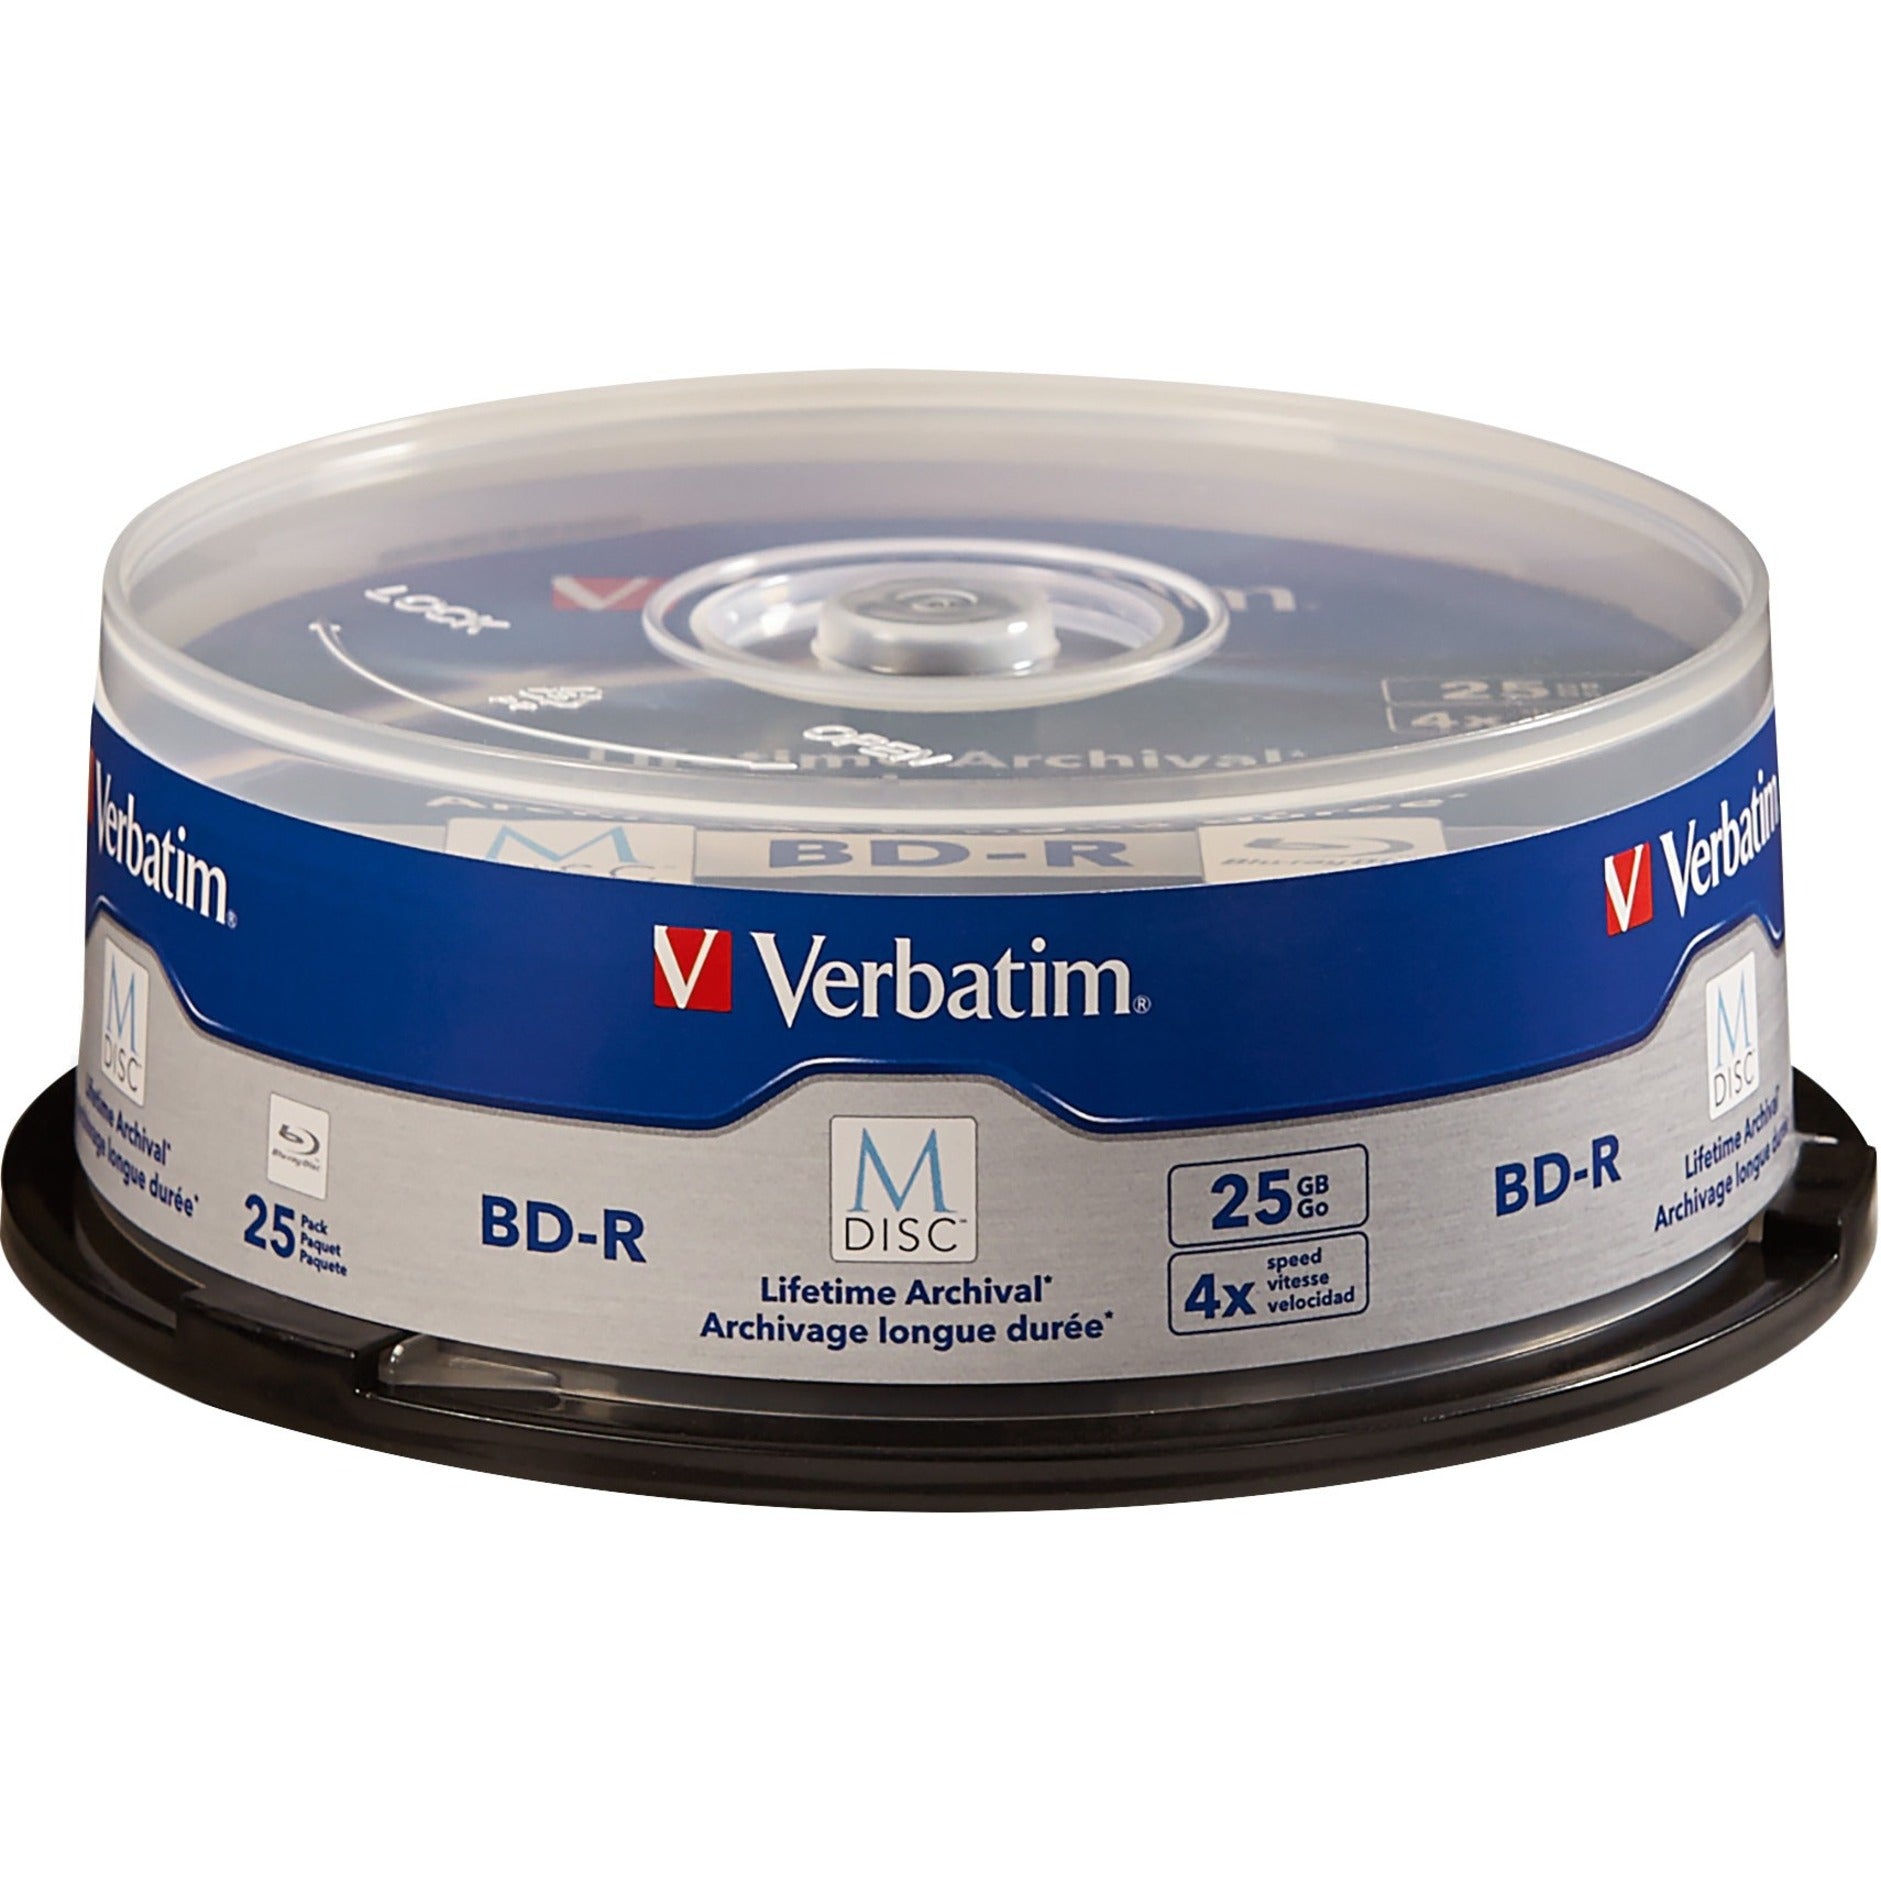 Verbatim 98909 M-Disc BD-R 25GB 4X with Branded Surface - 25pk Spindle, 10 Year Limited Warranty, Taiwan Origin